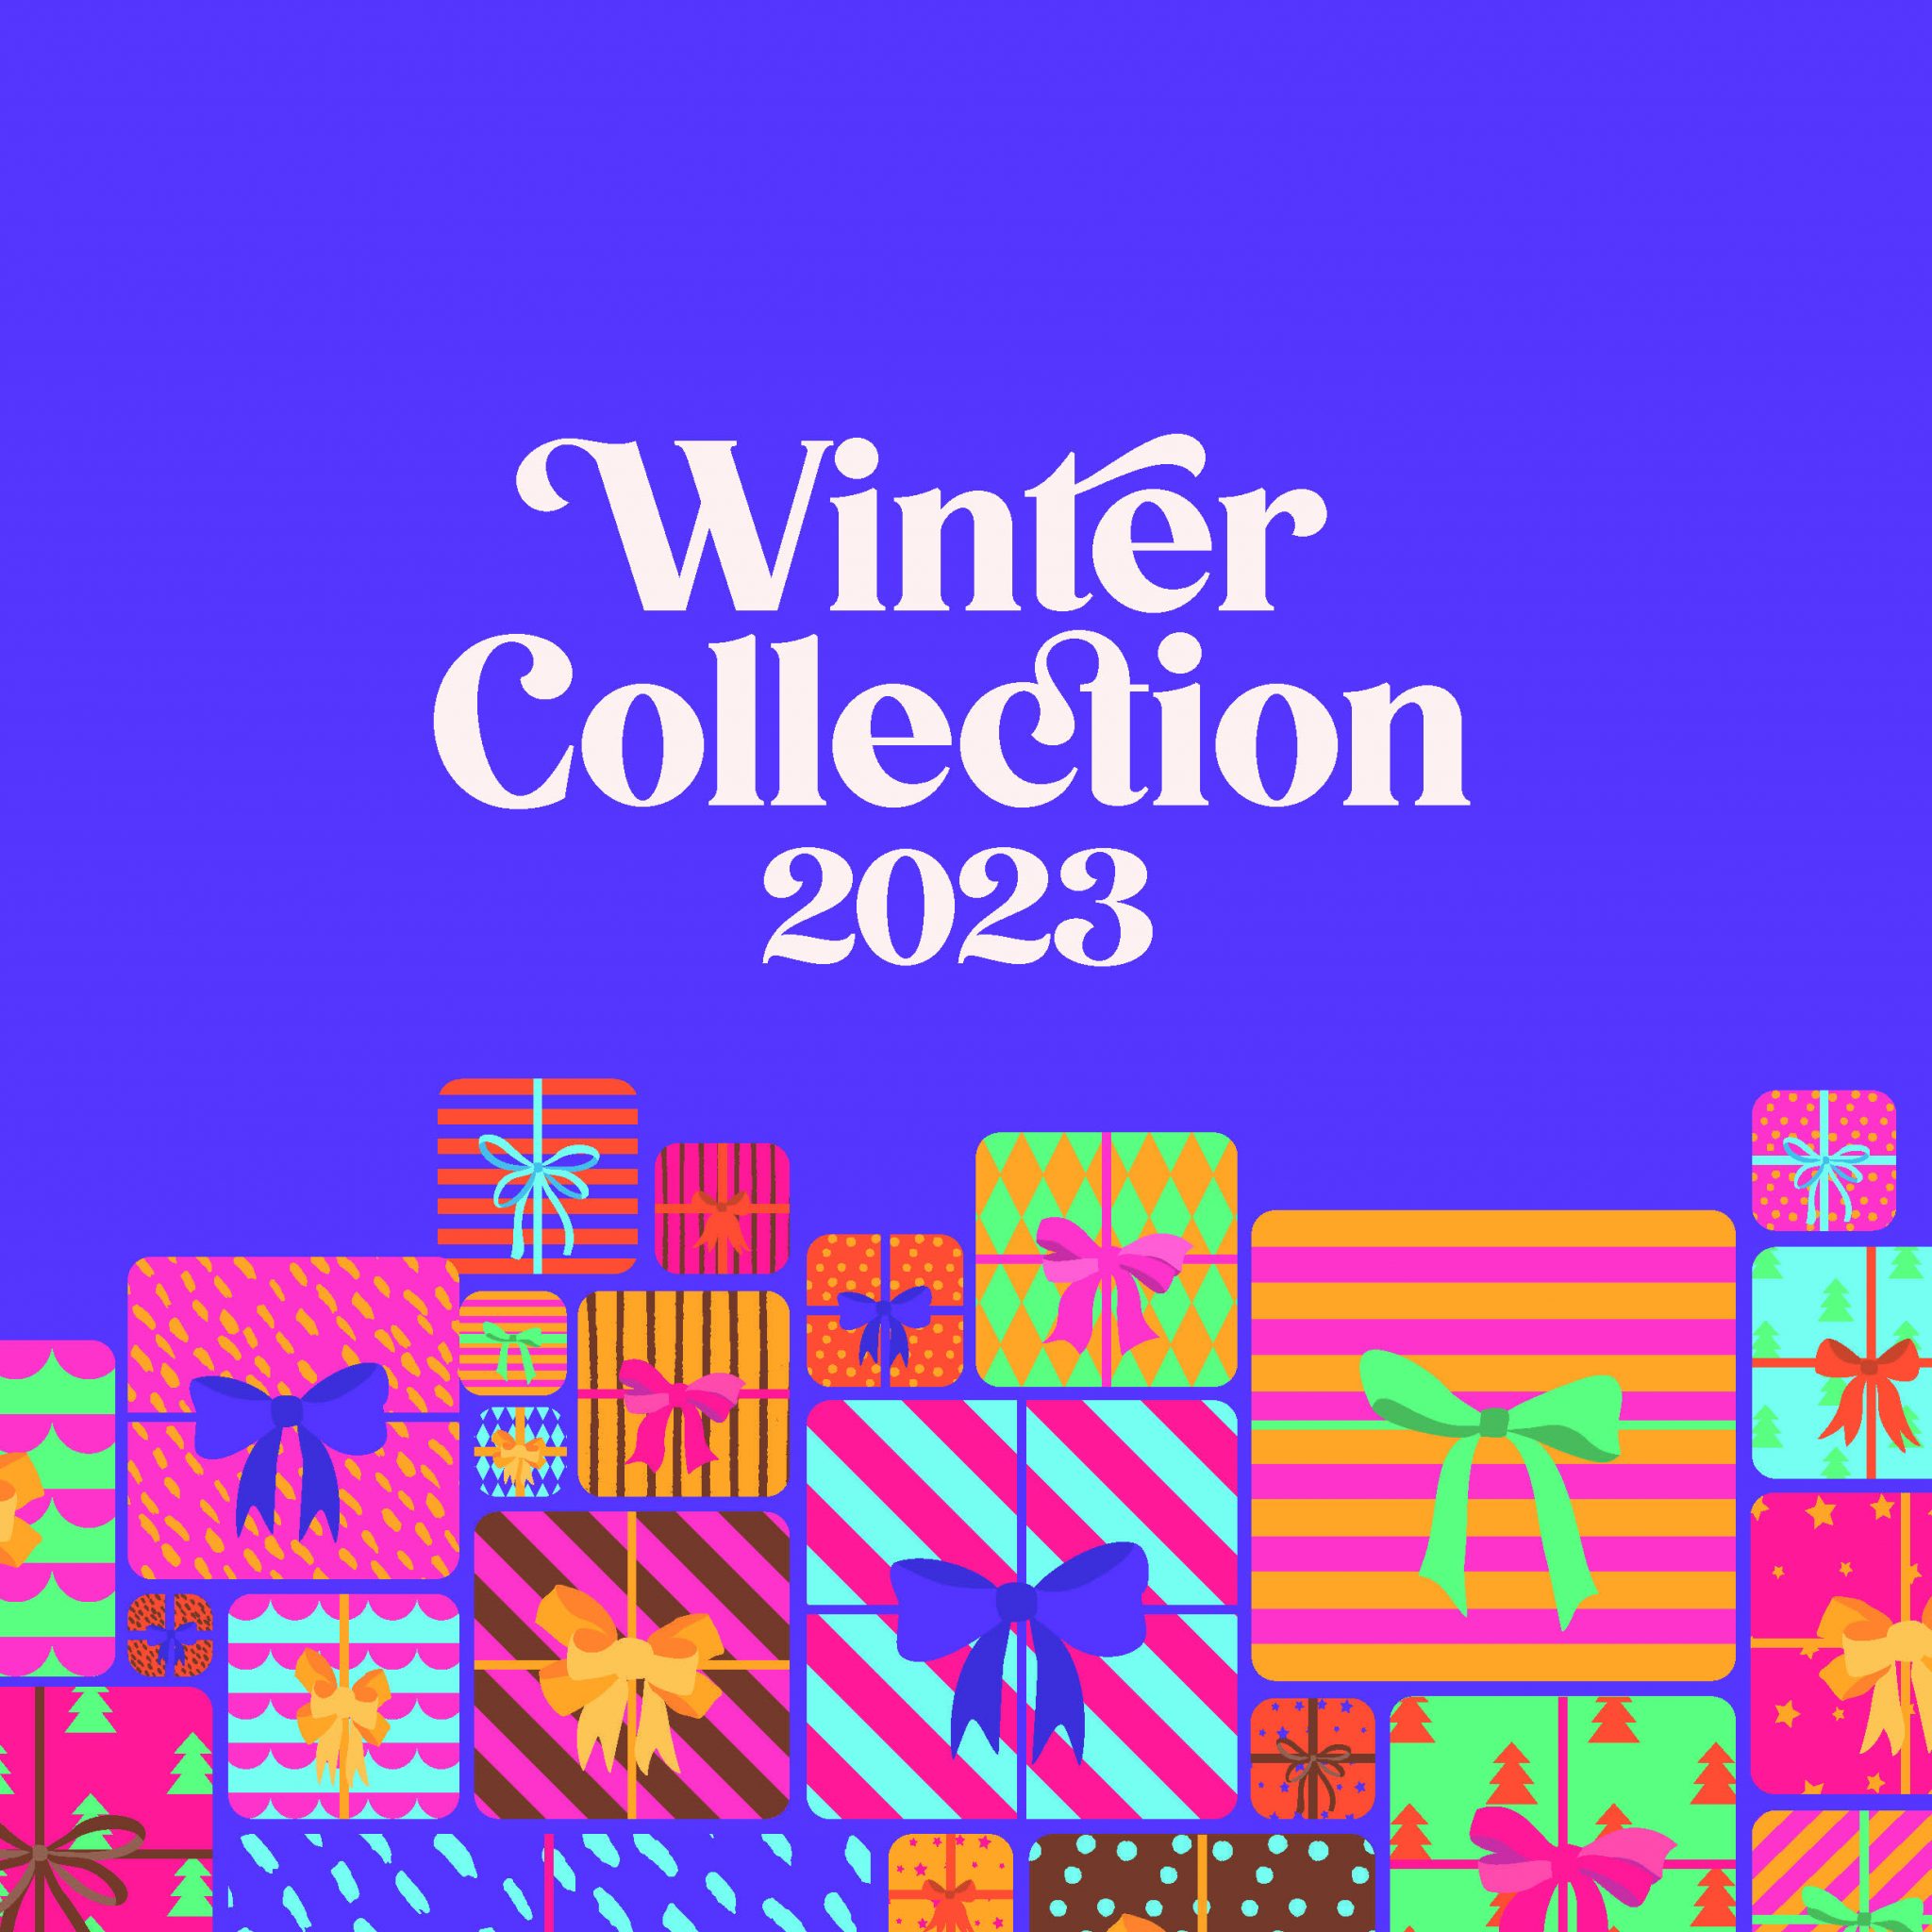 Text: Winter Collection 2023 with a pile of multi coloured gifts at the bottom of the image.